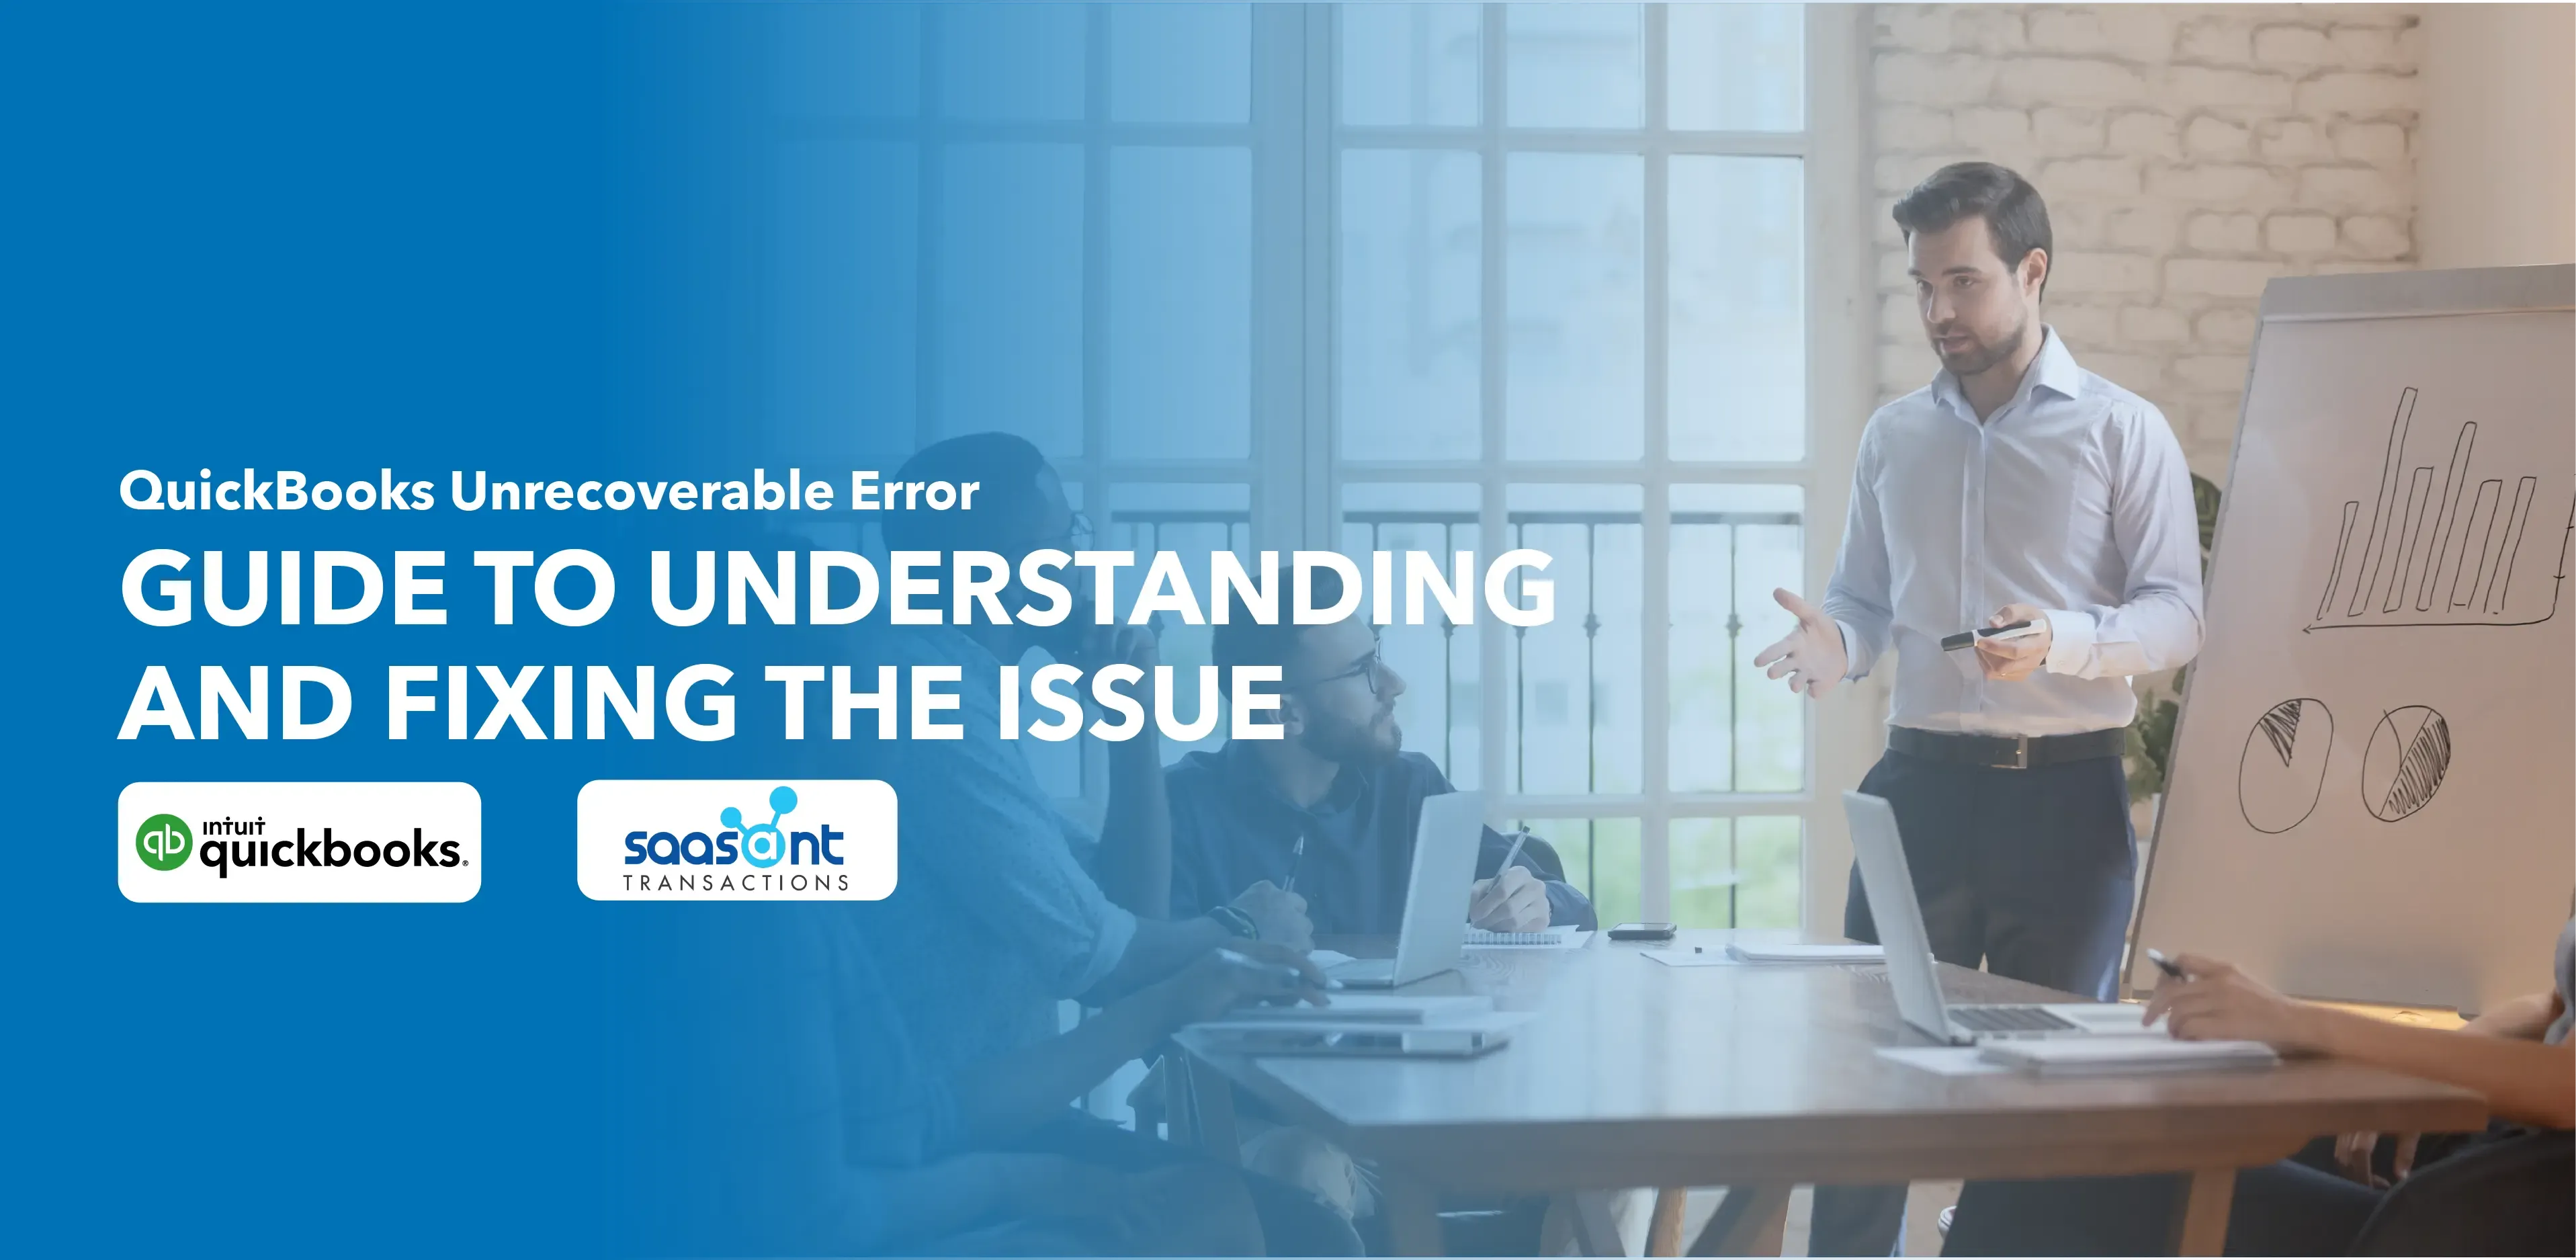 QuickBooks Unrecoverable Error: Guide to Understanding and Fixing the Issue